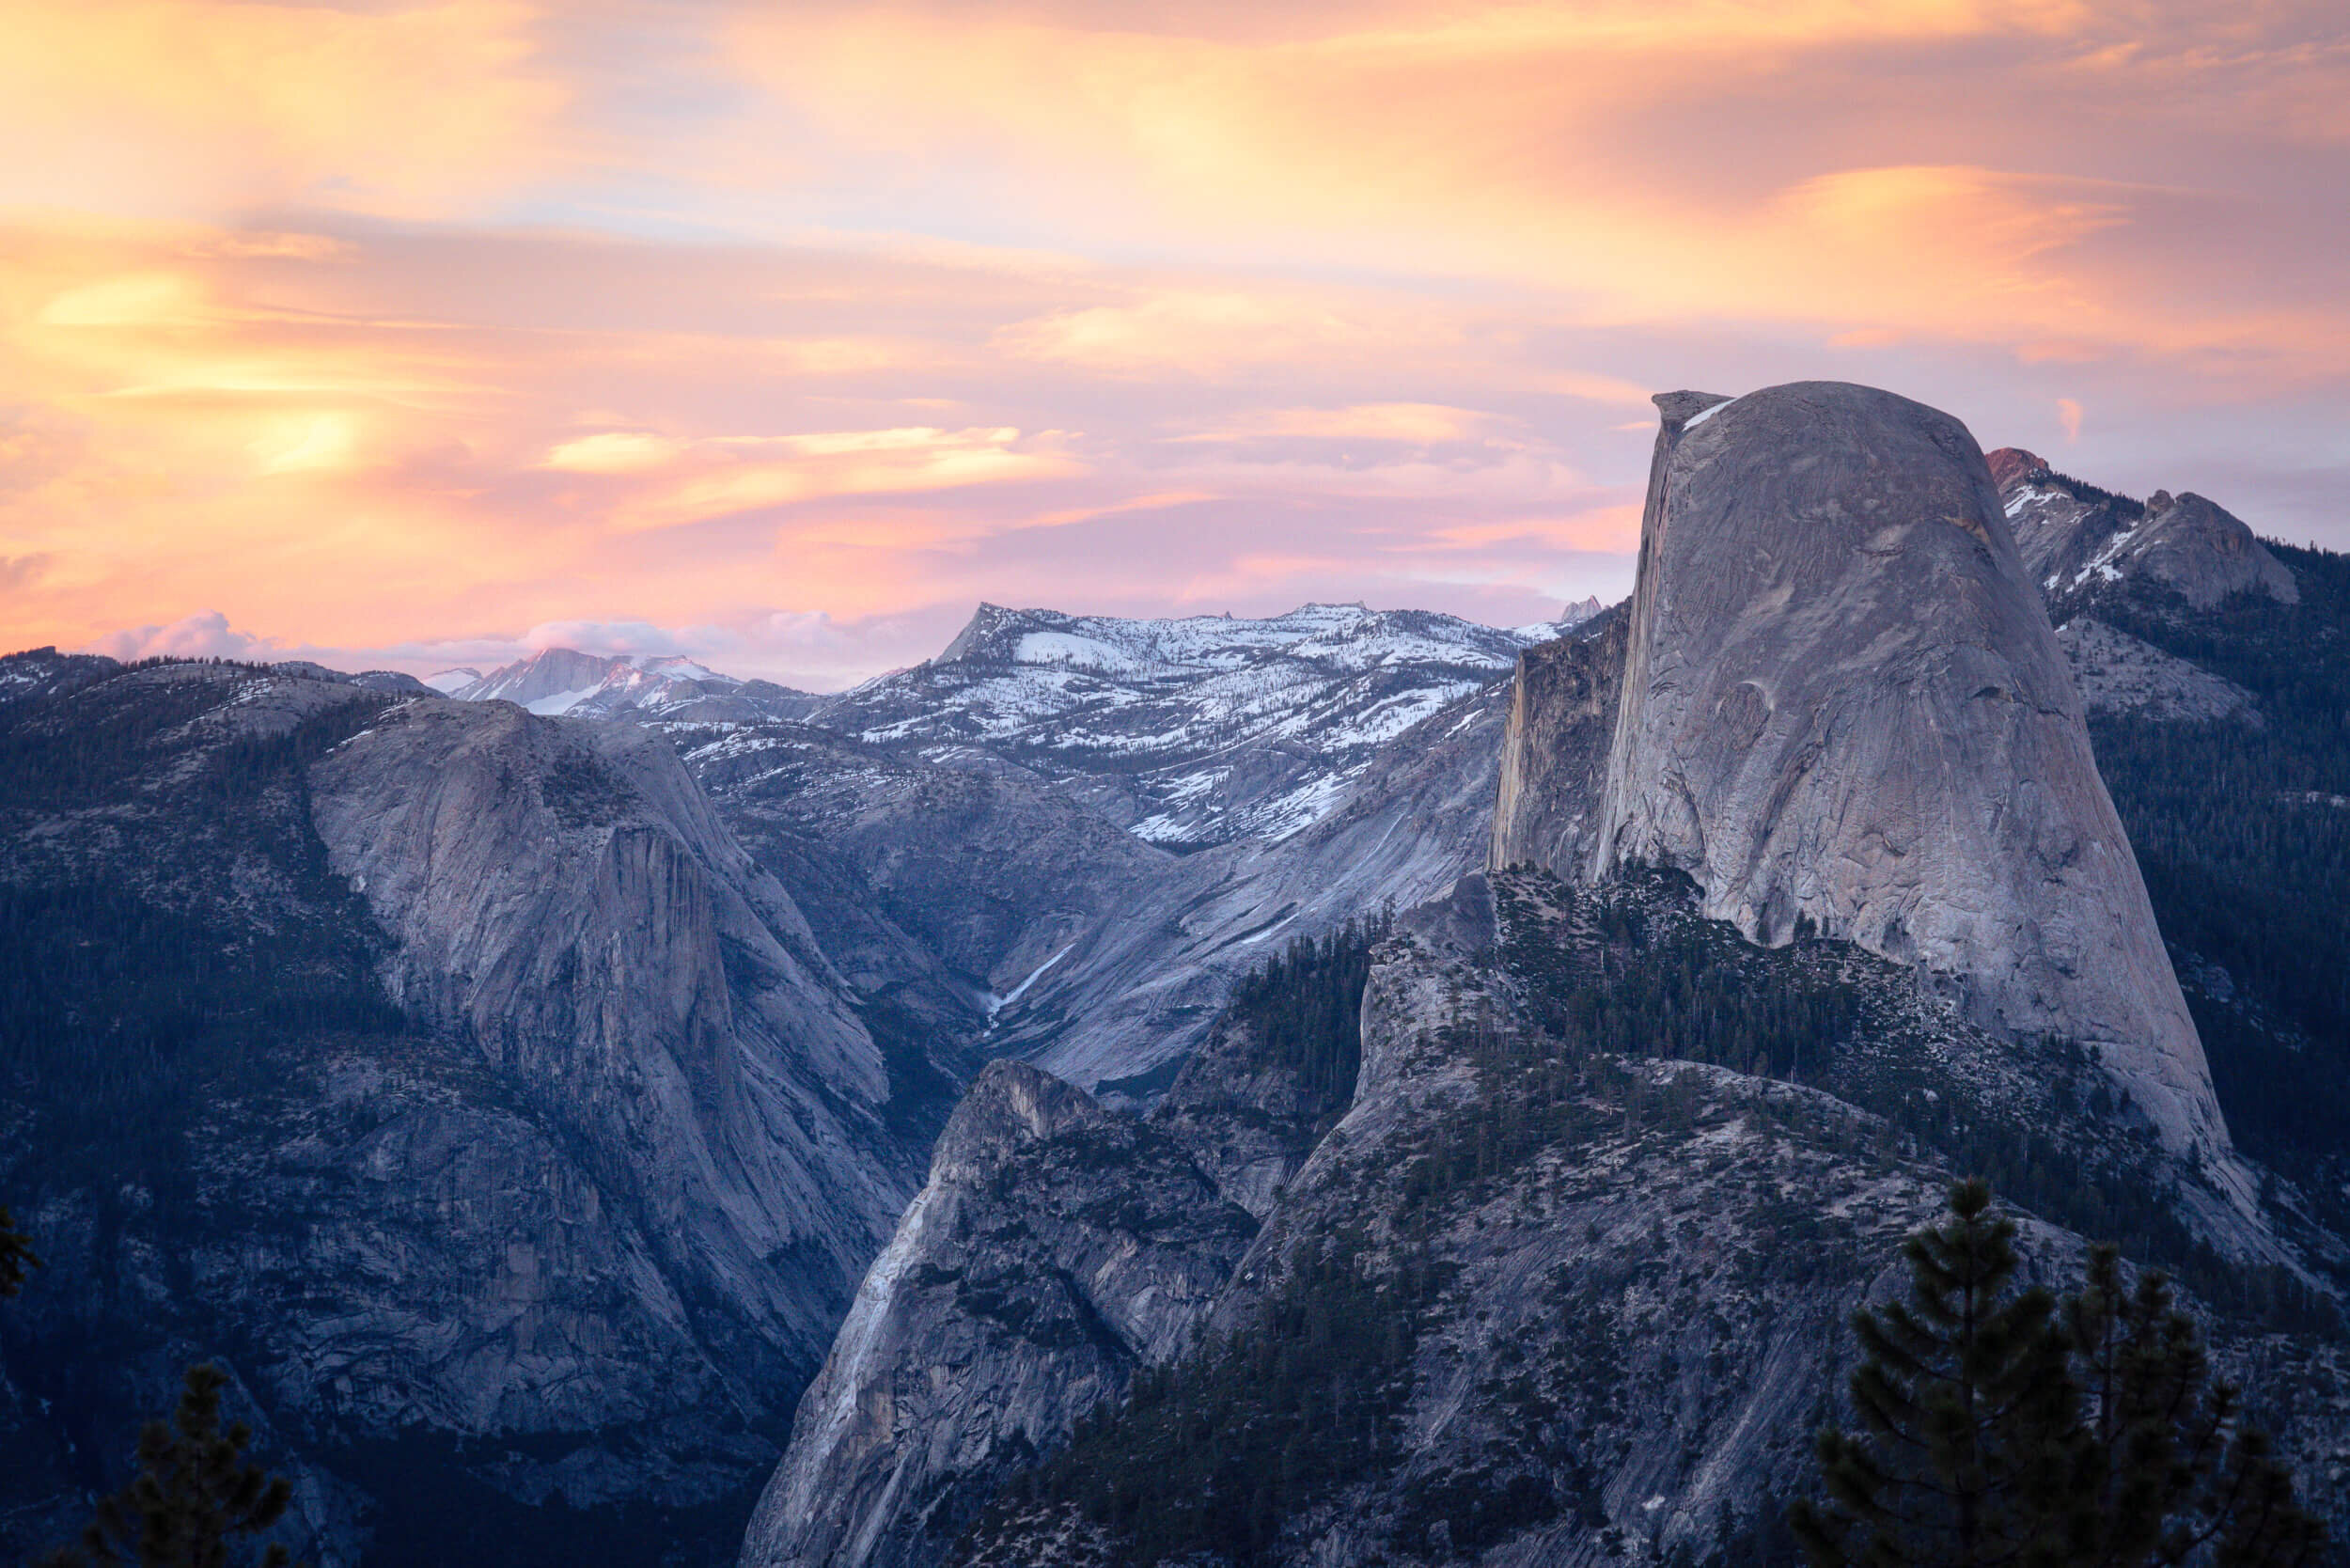 Sunset views of Half Dome in Yosemite National Park.